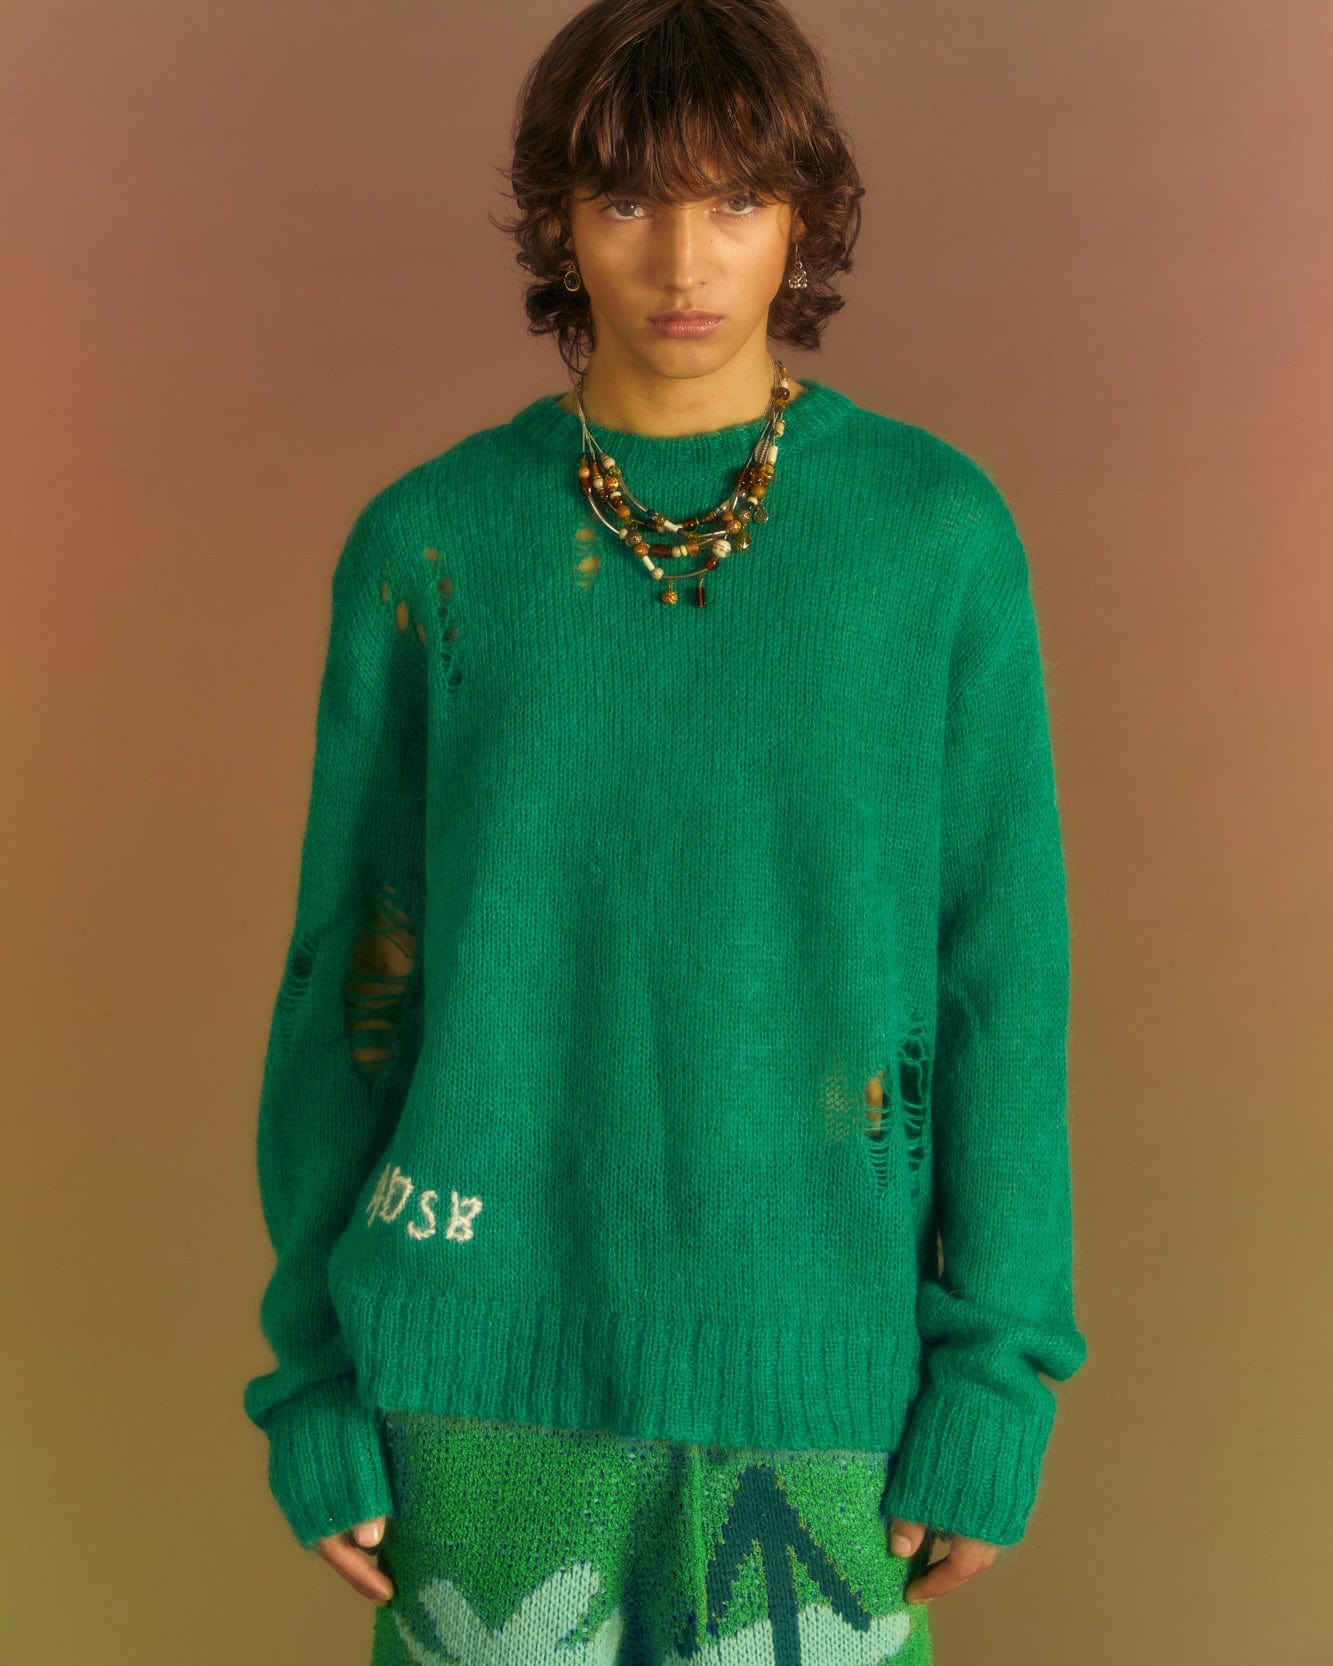 ESSENTIAL) ADSB KID MOHAIR CREW-NECK SWEATER atb1038m(GREEN 